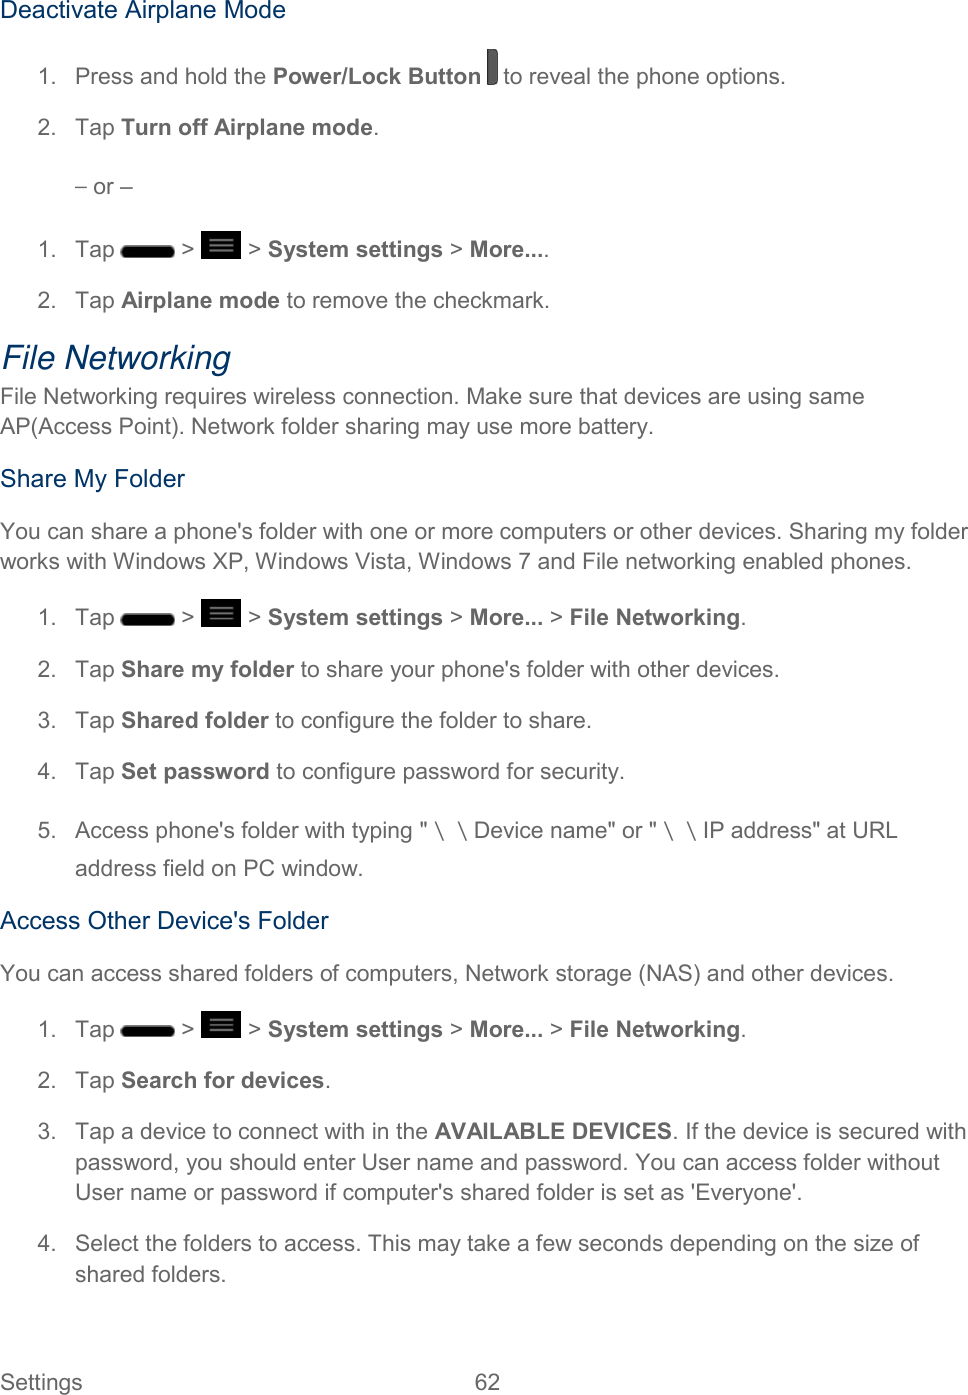  Settings  62   Deactivate Airplane Mode 1.  Press and hold the Power/Lock Button   to reveal the phone options. 2.  Tap Turn off Airplane mode. – or – 1.  Tap   &gt;   &gt; System settings &gt; More.... 2.  Tap Airplane mode to remove the checkmark. File Networking File Networking requires wireless connection. Make sure that devices are using same AP(Access Point). Network folder sharing may use more battery. Share My Folder You can share a phone&apos;s folder with one or more computers or other devices. Sharing my folder works with Windows XP, Windows Vista, Windows 7 and File networking enabled phones. 1.  Tap   &gt;   &gt; System settings &gt; More... &gt; File Networking. 2.  Tap Share my folder to share your phone&apos;s folder with other devices. 3.  Tap Shared folder to configure the folder to share. 4.  Tap Set password to configure password for security. 5.  Access phone&apos;s folder with typing &quot;＼＼Device name&quot; or &quot;＼＼IP address&quot; at URL address field on PC window. Access Other Device&apos;s Folder You can access shared folders of computers, Network storage (NAS) and other devices. 1.  Tap   &gt;   &gt; System settings &gt; More... &gt; File Networking. 2.  Tap Search for devices. 3.  Tap a device to connect with in the AVAILABLE DEVICES. If the device is secured with password, you should enter User name and password. You can access folder without User name or password if computer&apos;s shared folder is set as &apos;Everyone&apos;. 4.  Select the folders to access. This may take a few seconds depending on the size of shared folders. 